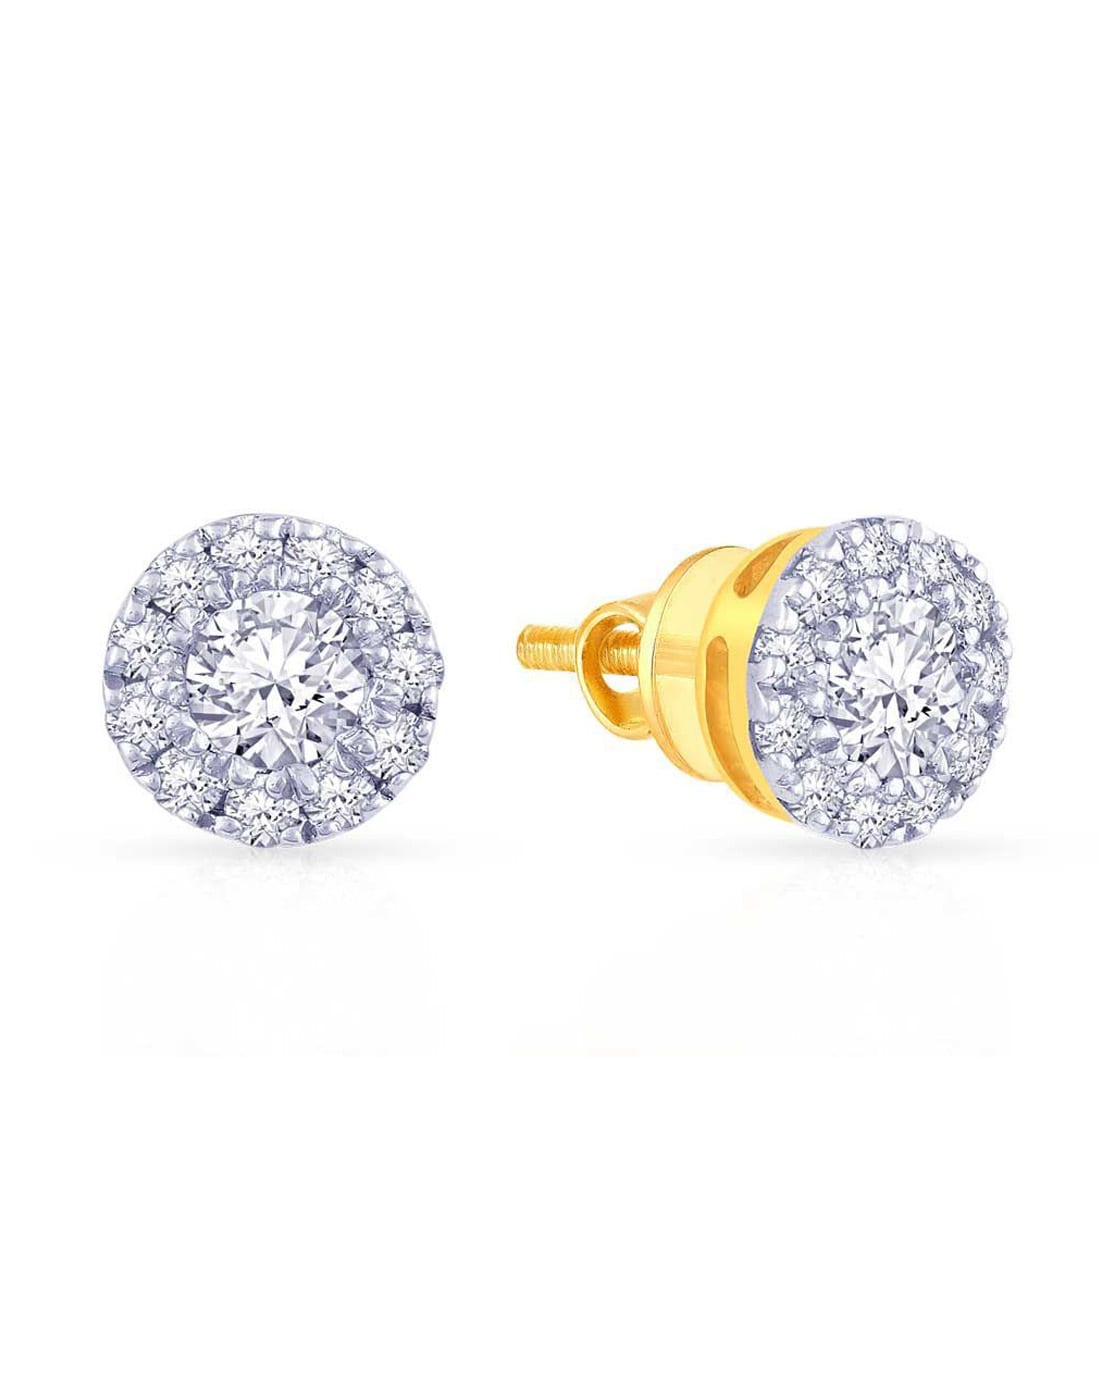 Details 112+ malabar gold and diamonds earrings